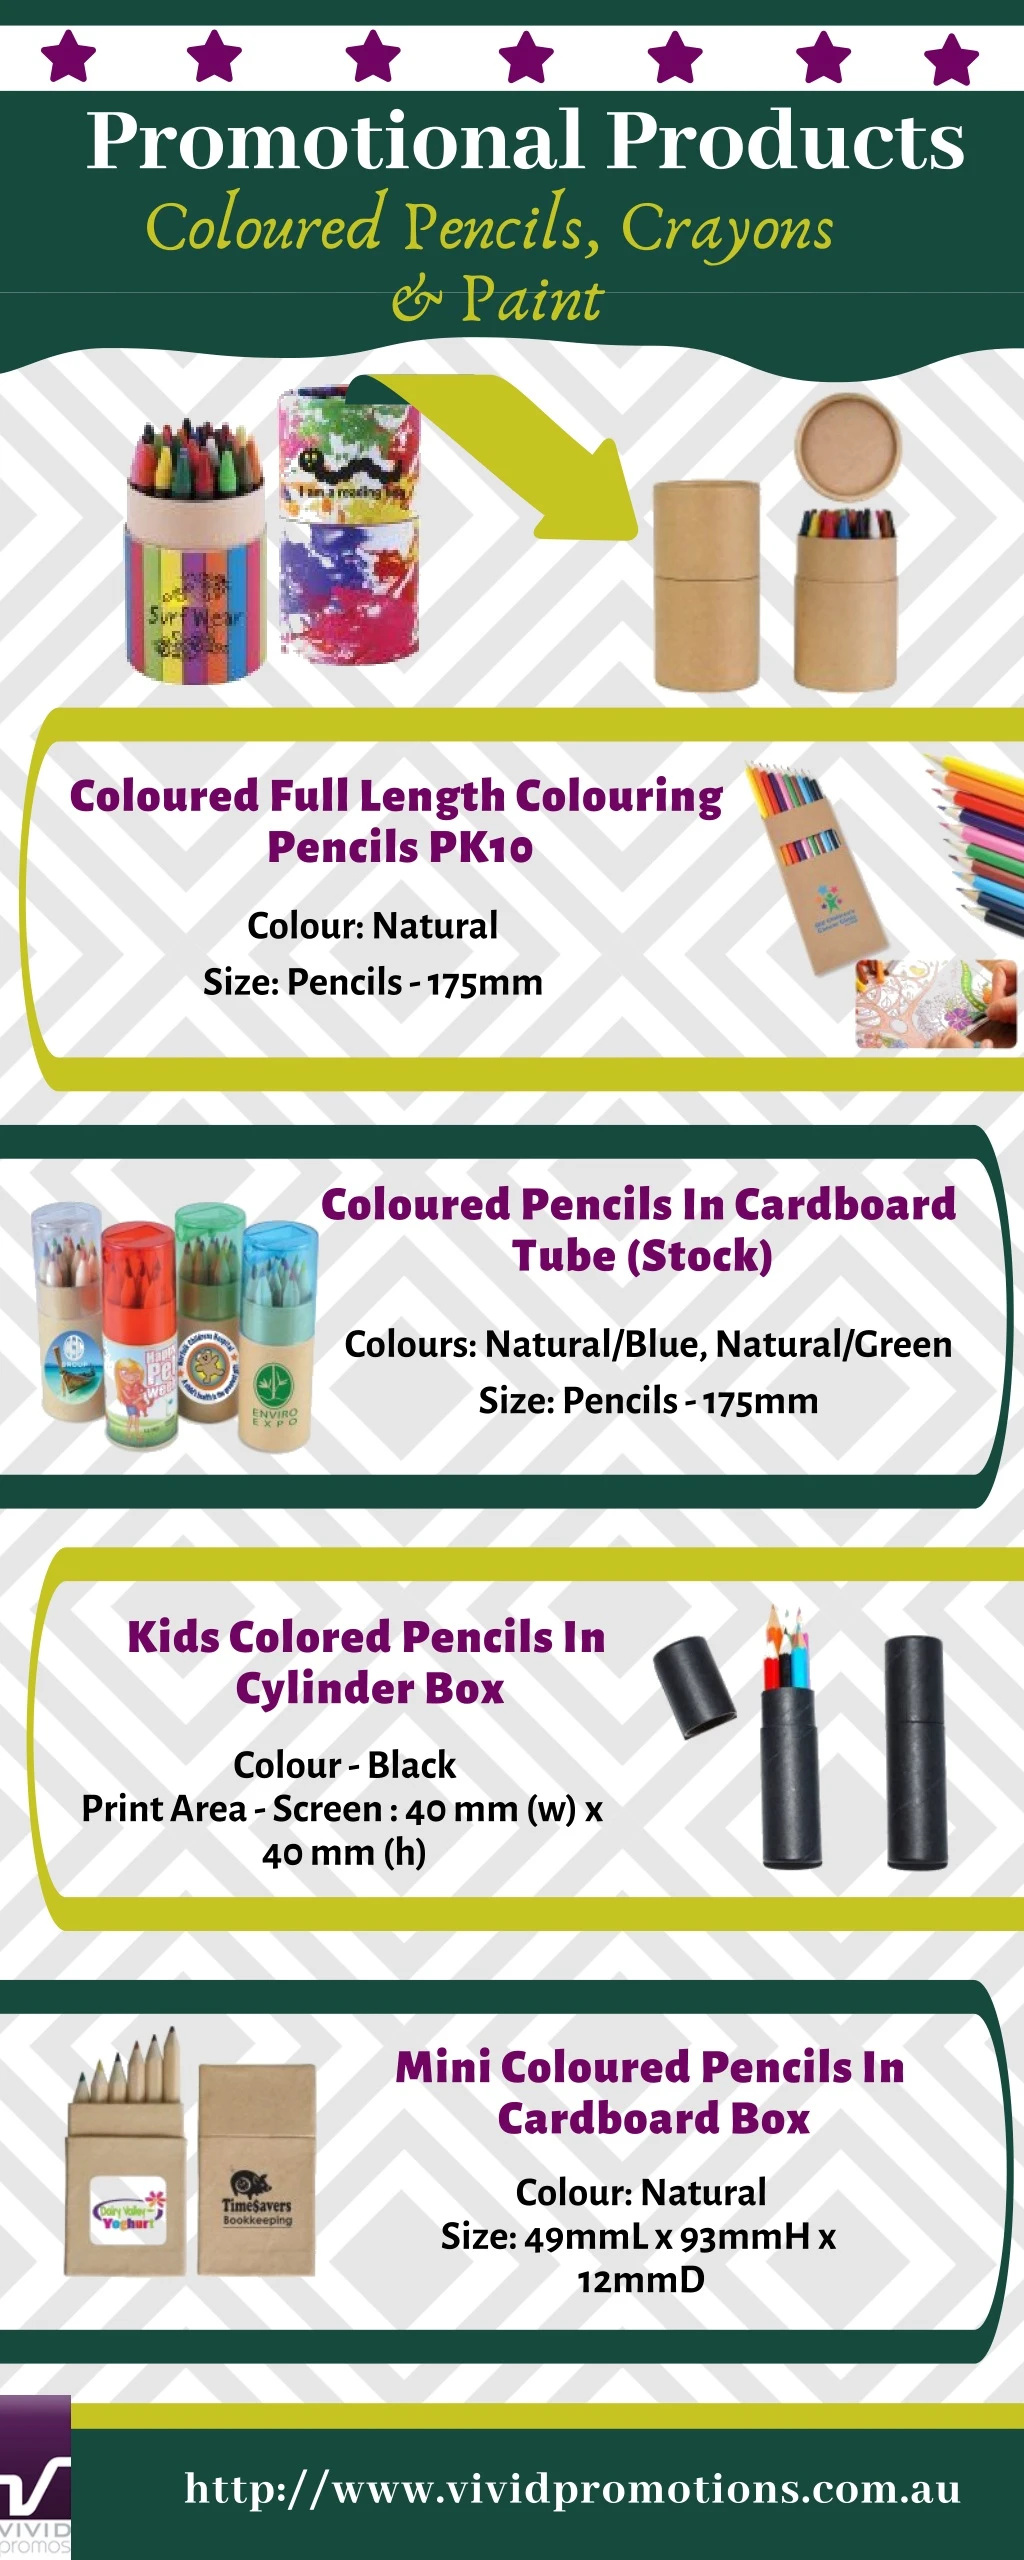 promotional products coloured pencils crayons